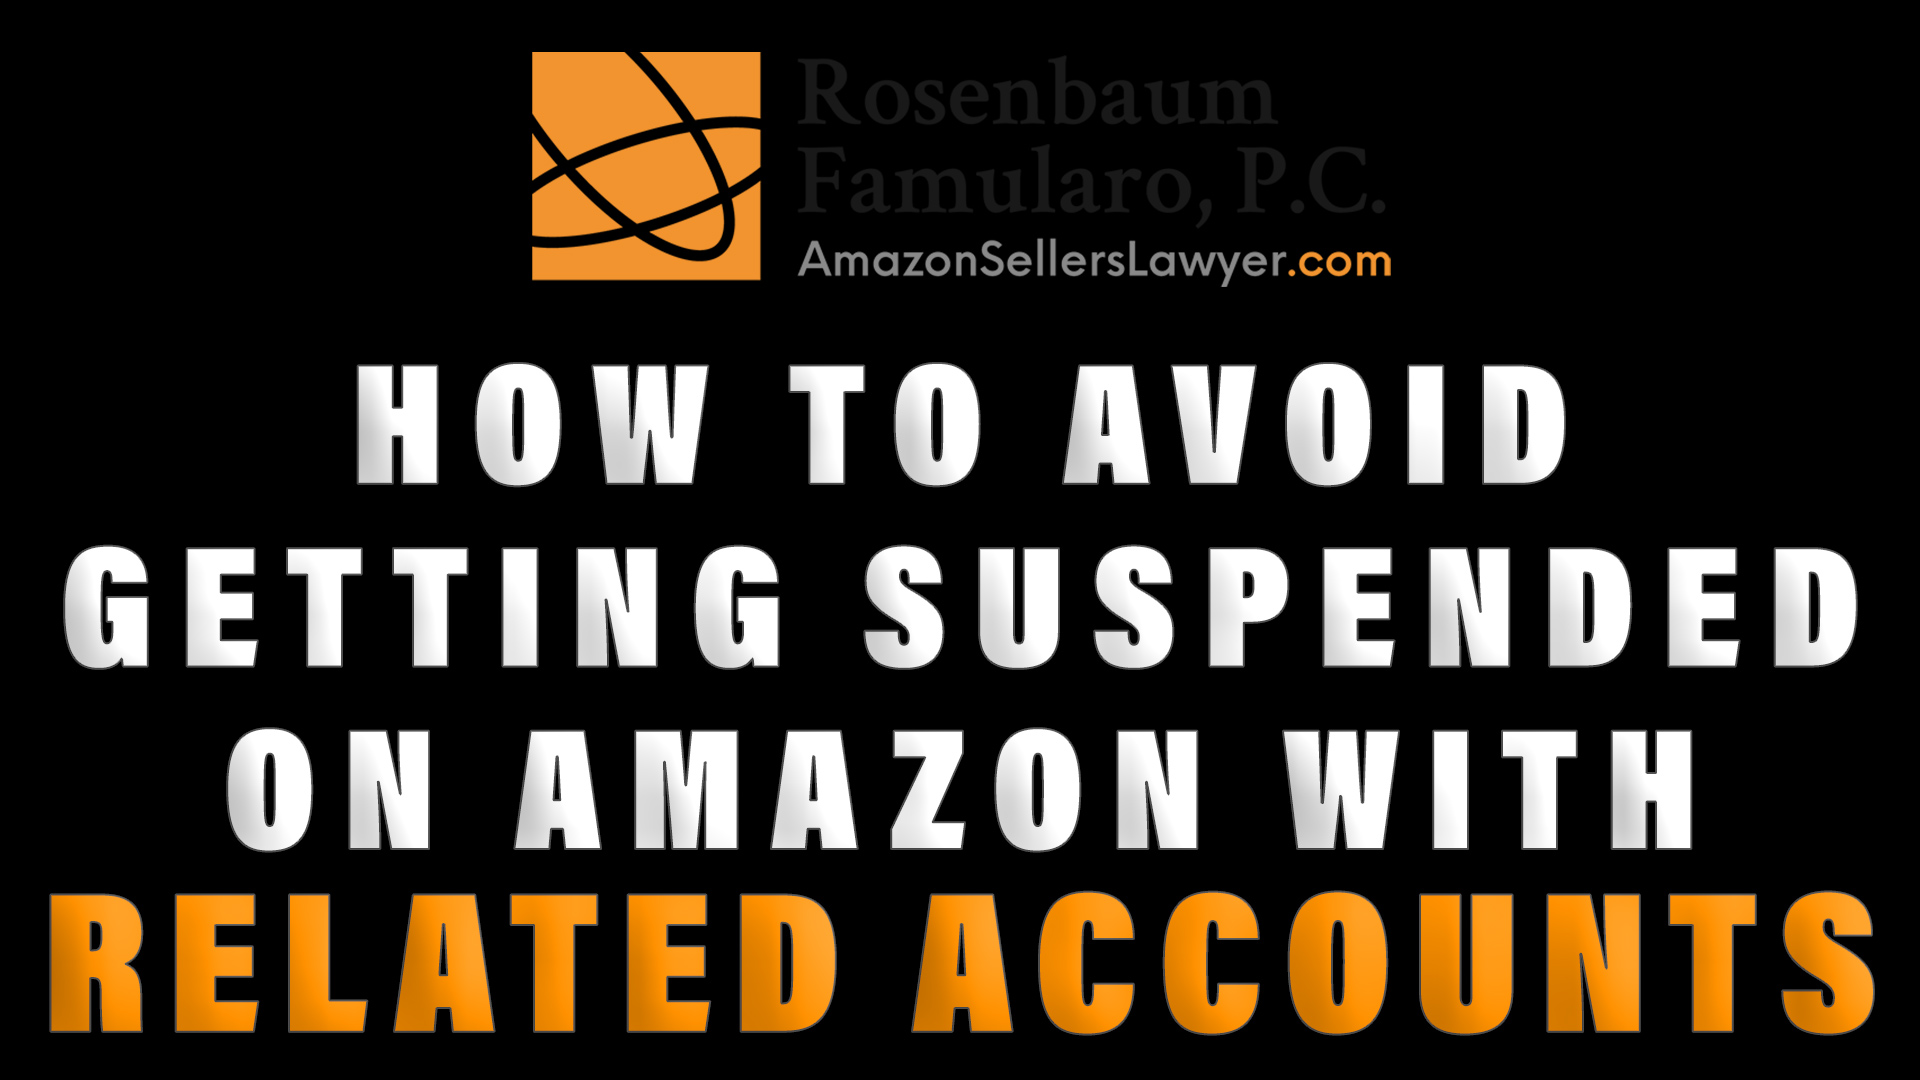 How to Avoid Getting Suspended on Amazon with Related Accounts